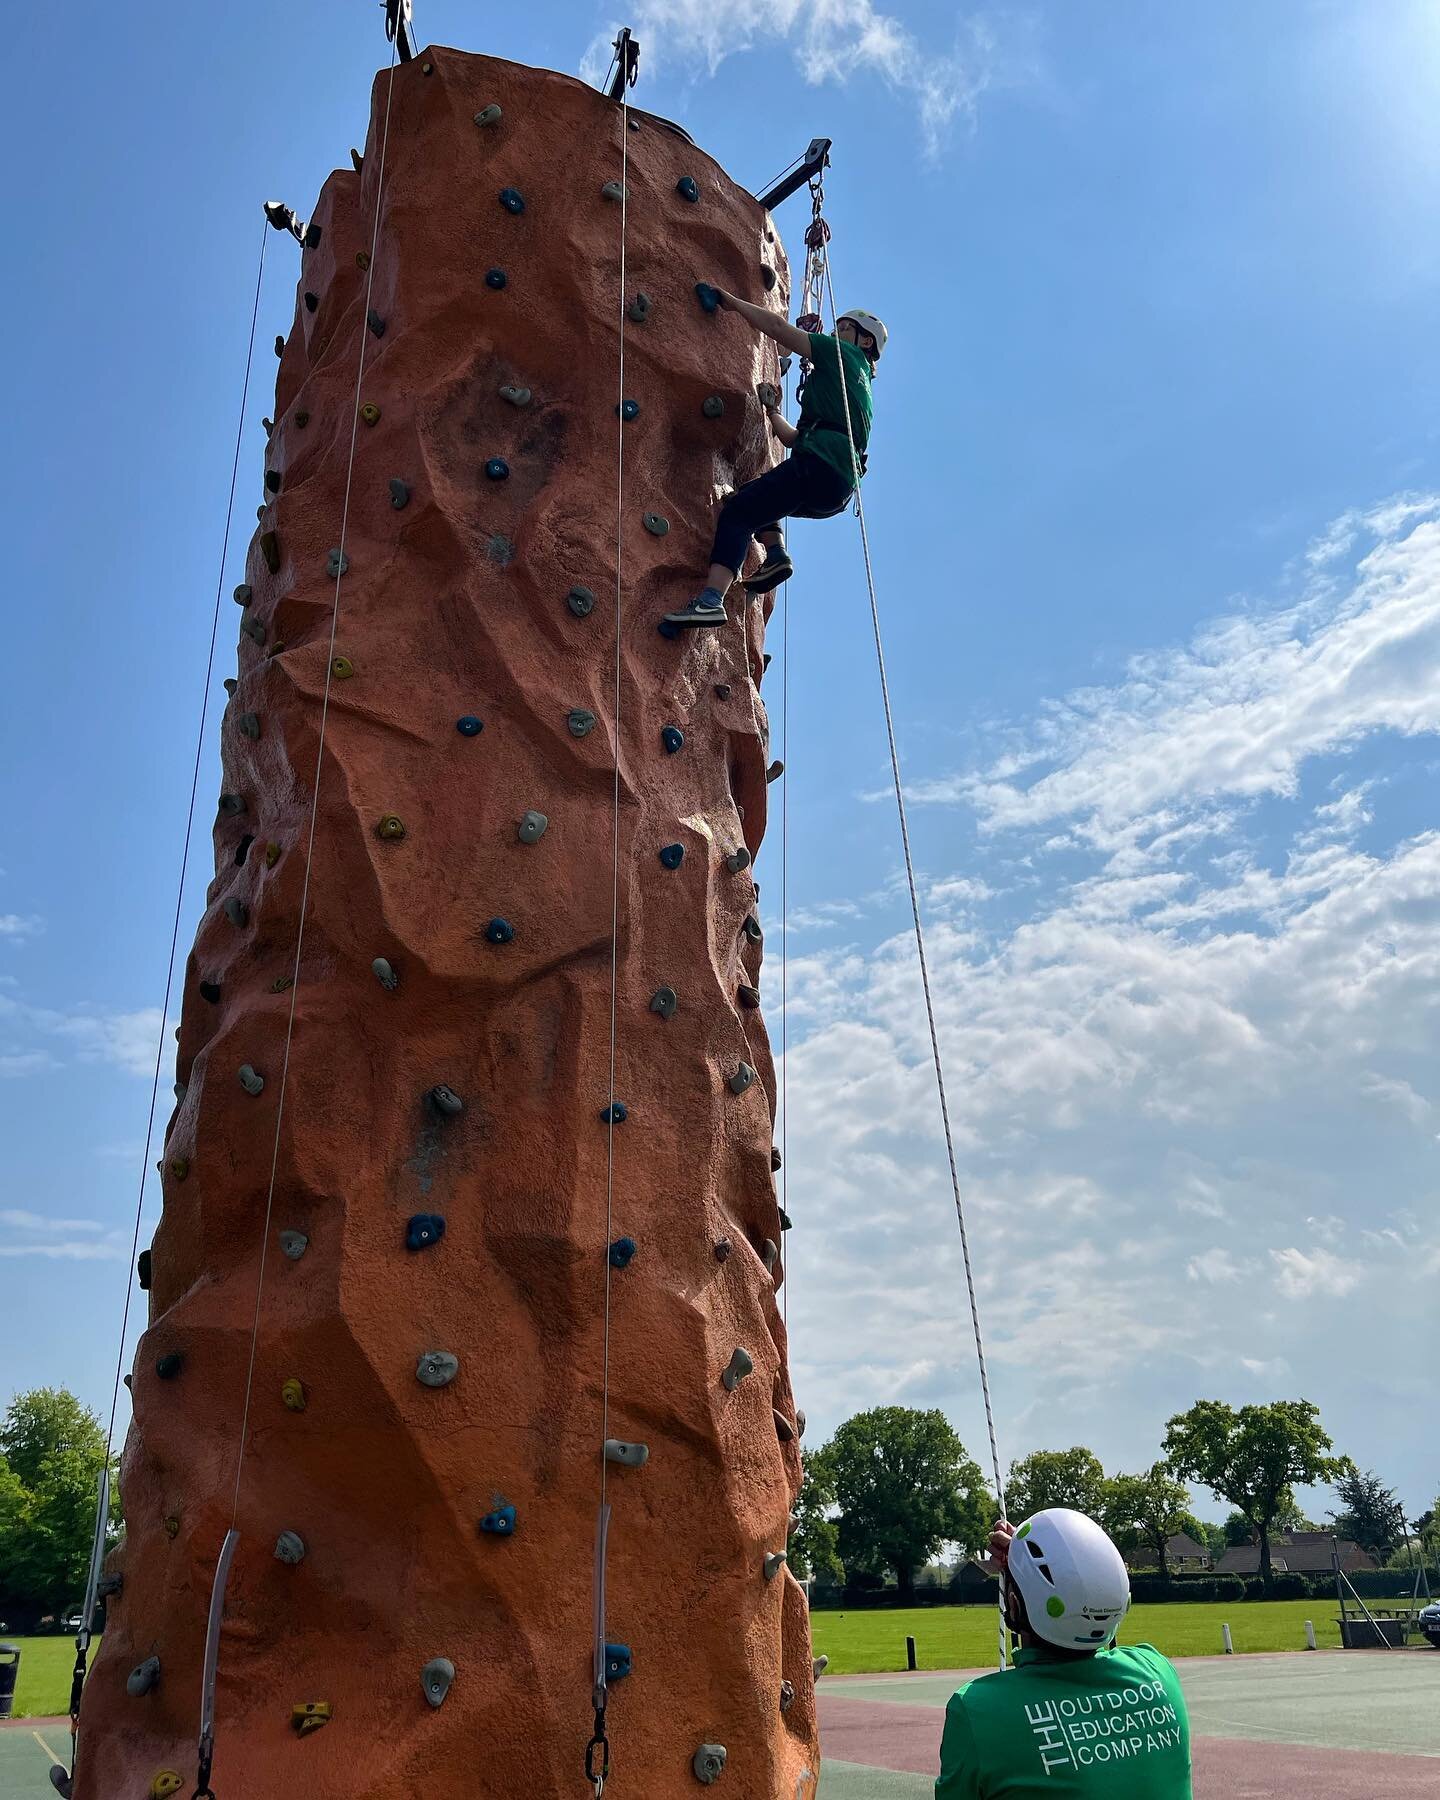 Harris CofE secondary. A day of climbing as part of a mental health wellbeing day. John and Georgie working together to set up our accessible kit which enabled a wheelchair user to access our activity.